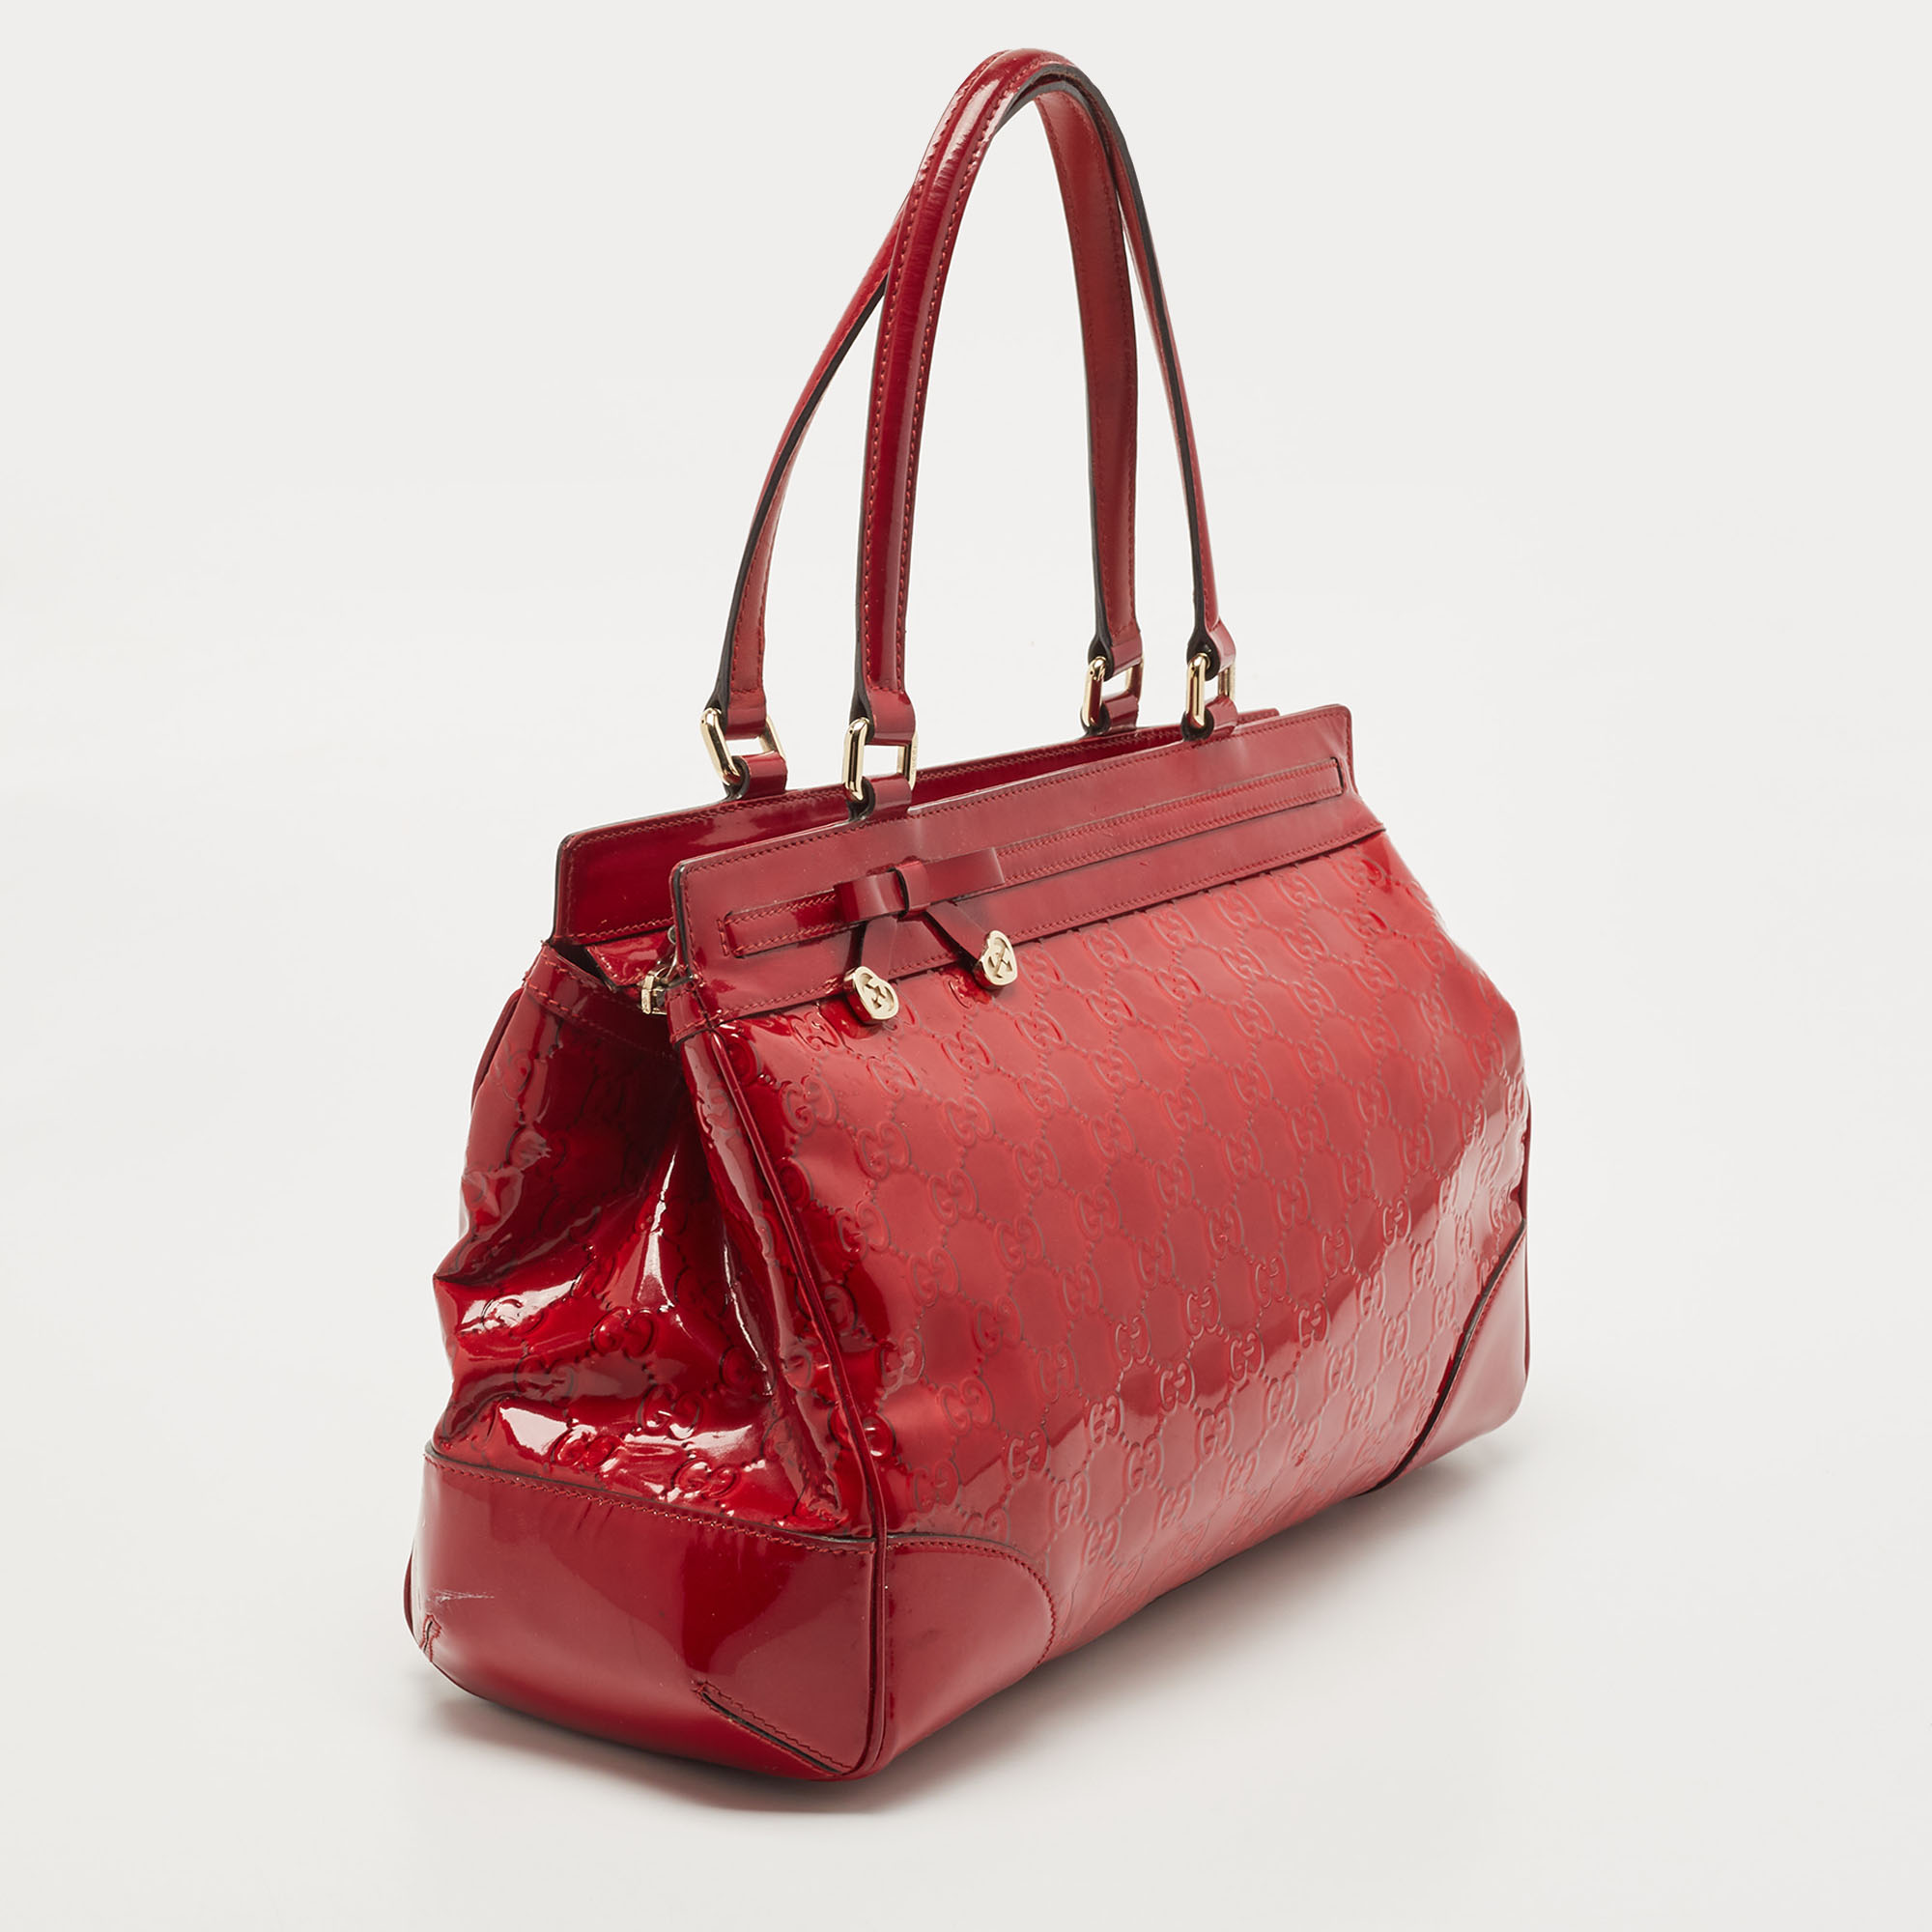 Gucci Red Guccissima Patent Leather Mayfair Bow Tote